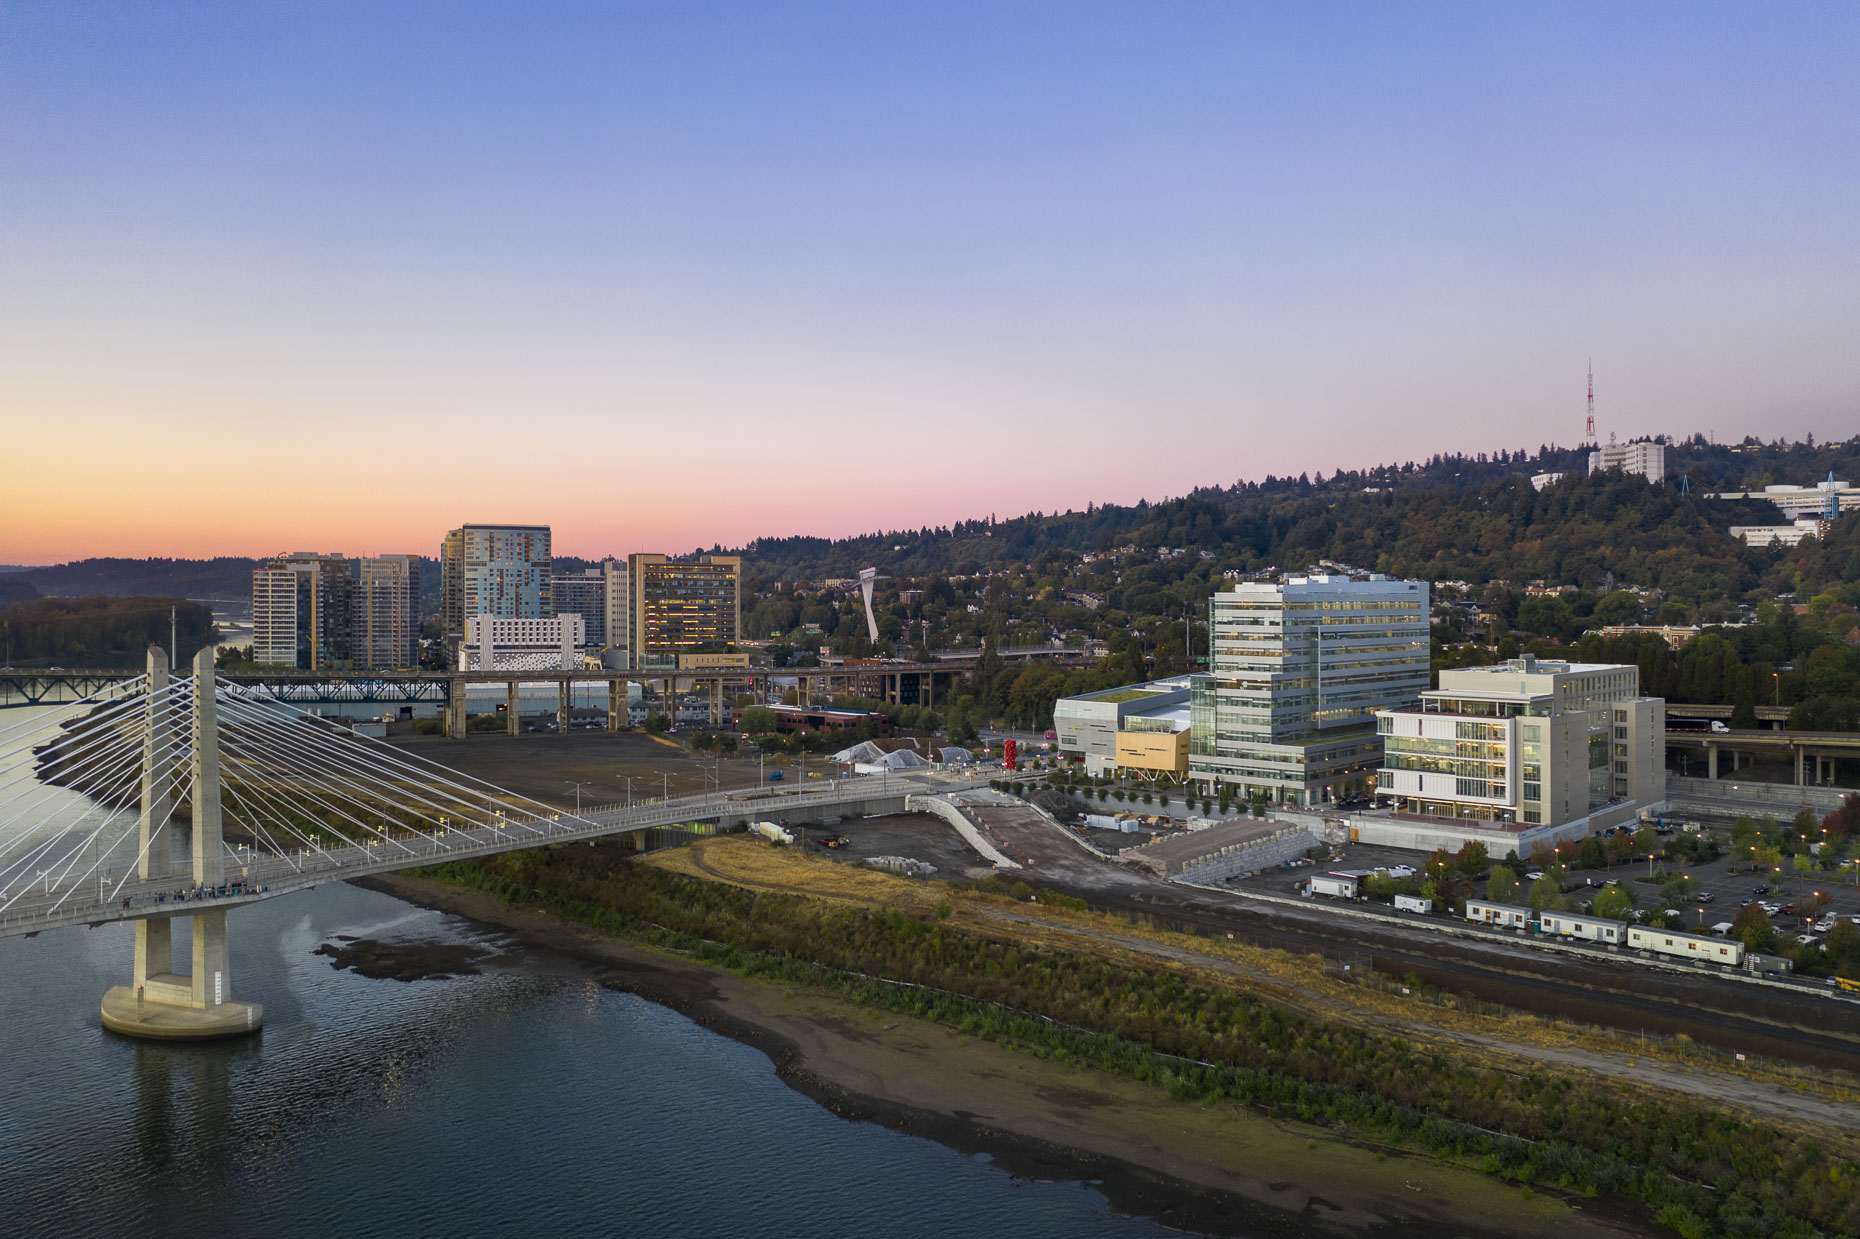 OHSU Knight Cancer Research Center by SRG Partnership photographed by Brad Feinknopf based in Columbus, Ohio